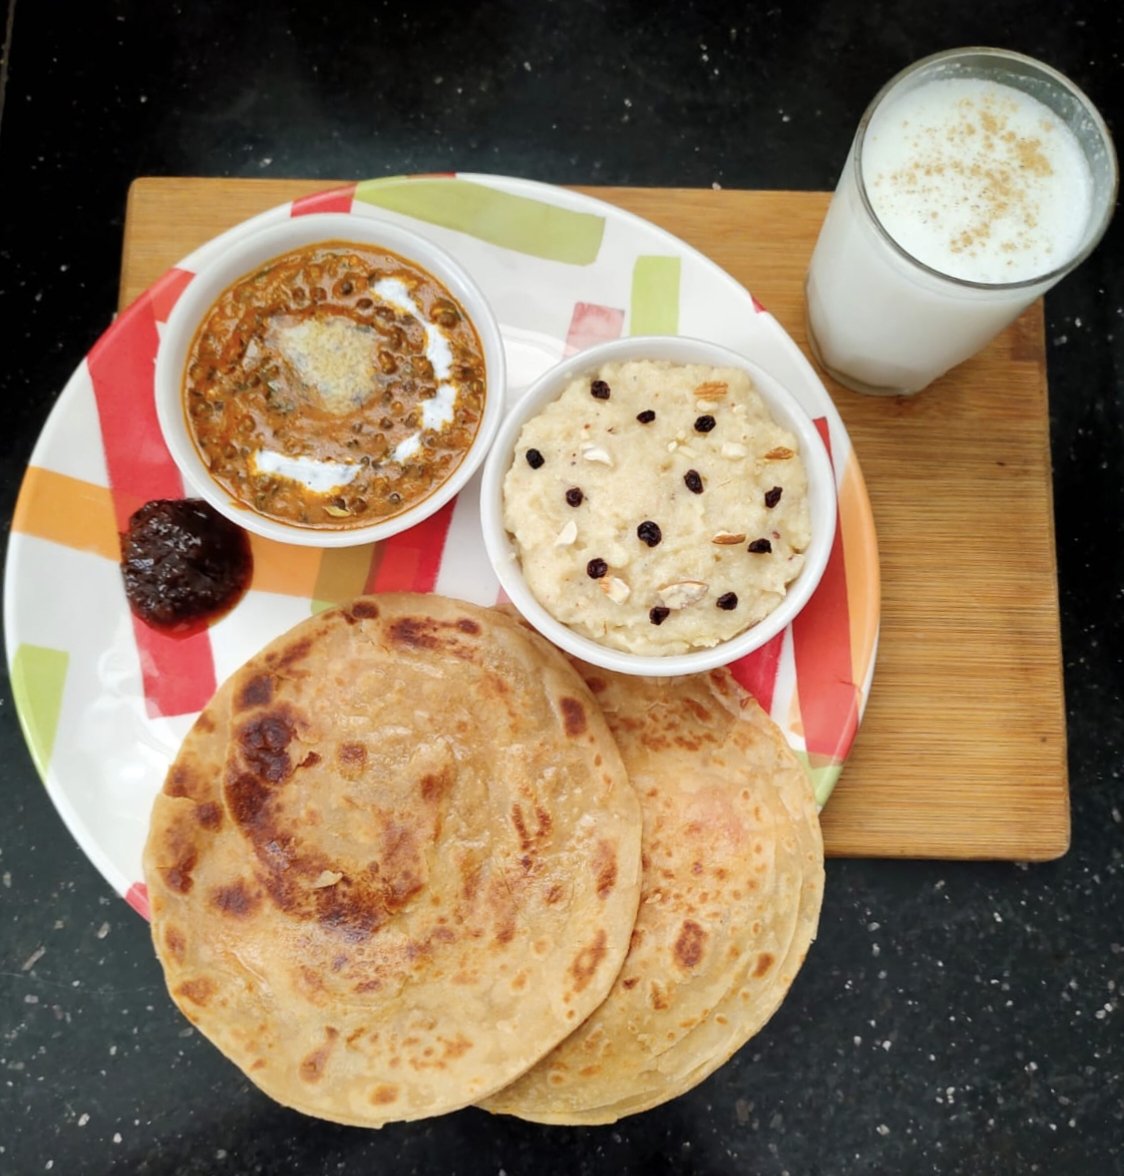 Dal Makhani, Paratha, Payasam garnish with Dried Black Current and  Dryfruits,  Apple Cinnamon Chutney (Himachal Pradesh Spe.) and Butter Milk....